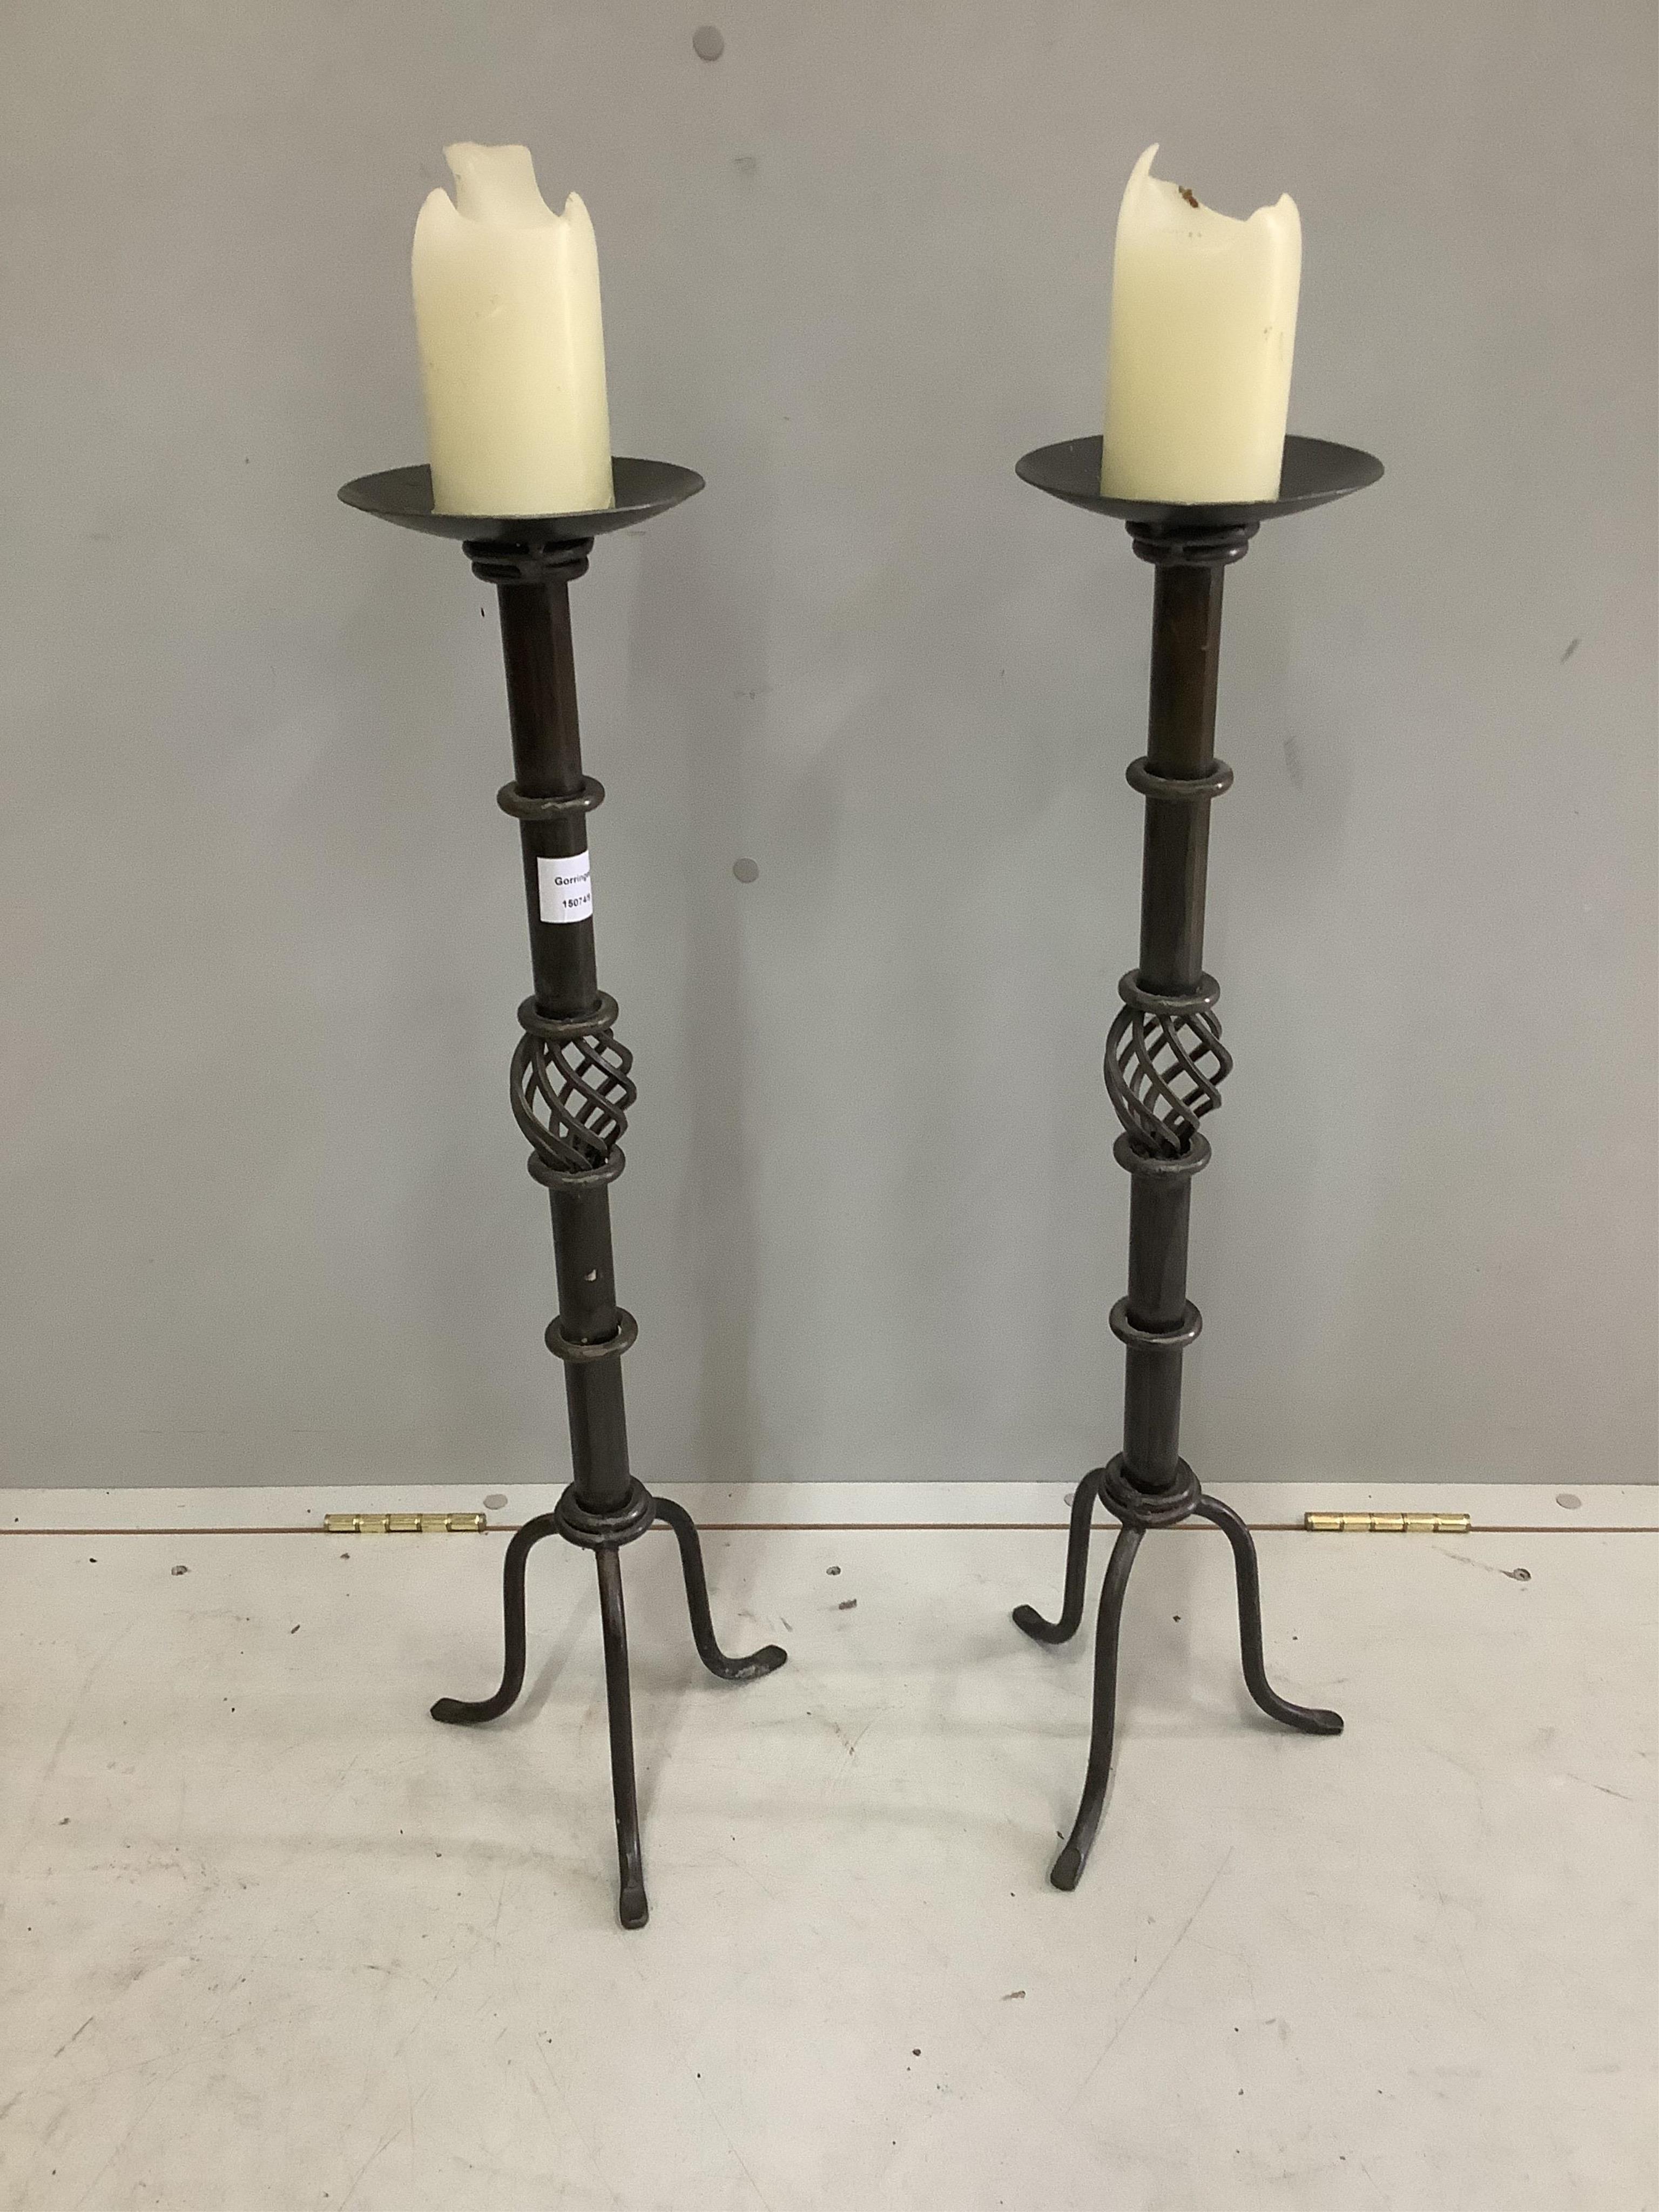 A pair of 18th century style wrought iron pricket candlesticks, height 73cm. Condition - good